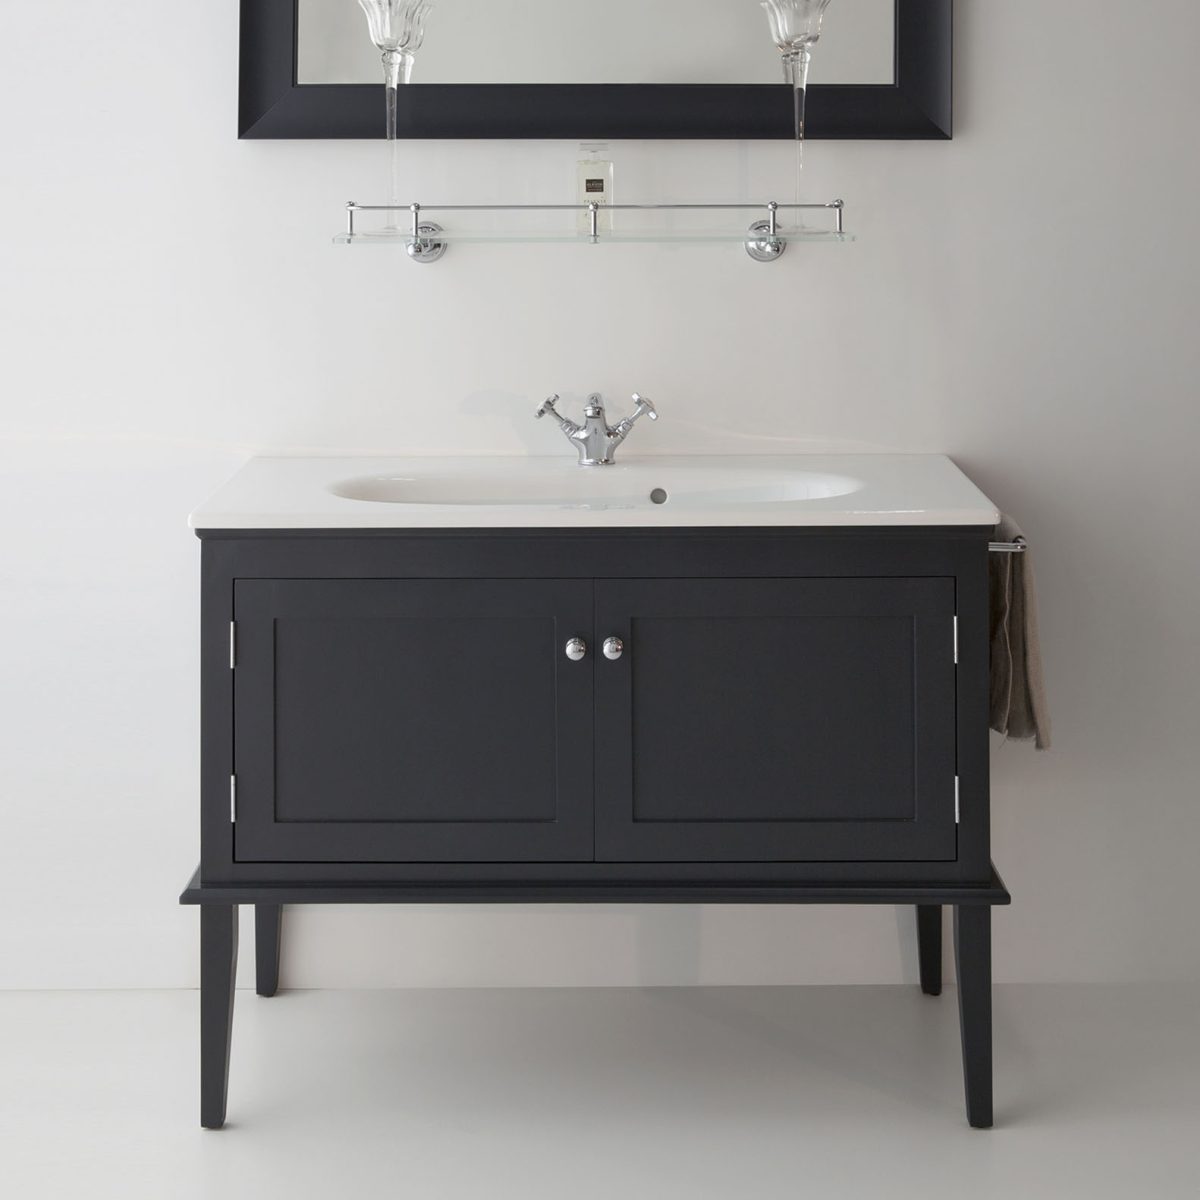 Albion Hamar Vanity Basin 1000mm wide painted in Farrow and Ball Railings